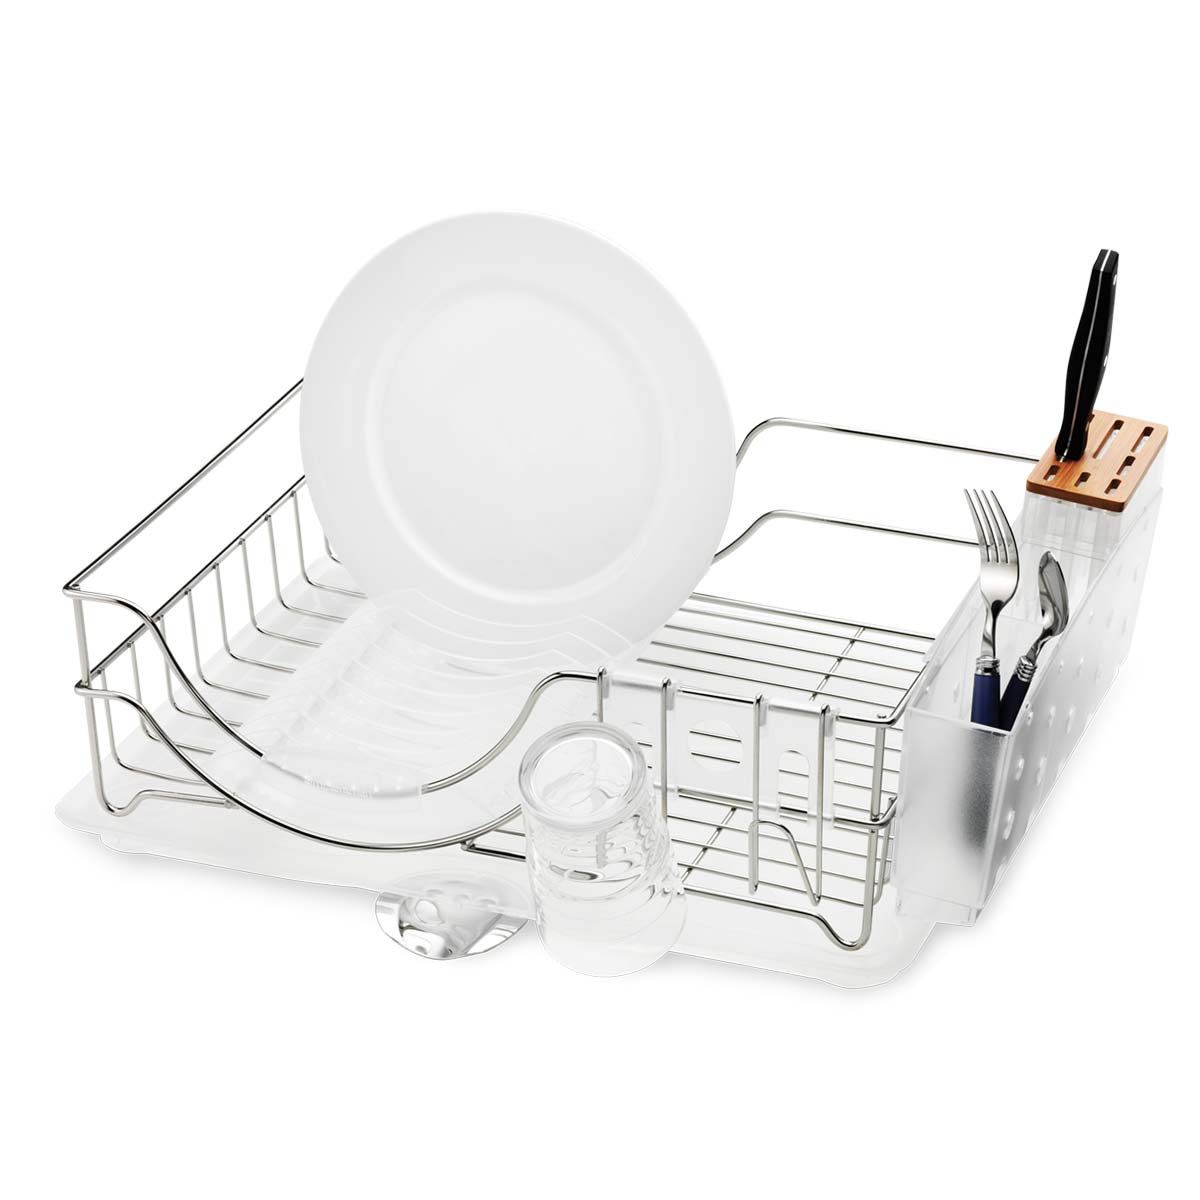 simplehuman - our new dishrack has arrived ✨ new features include